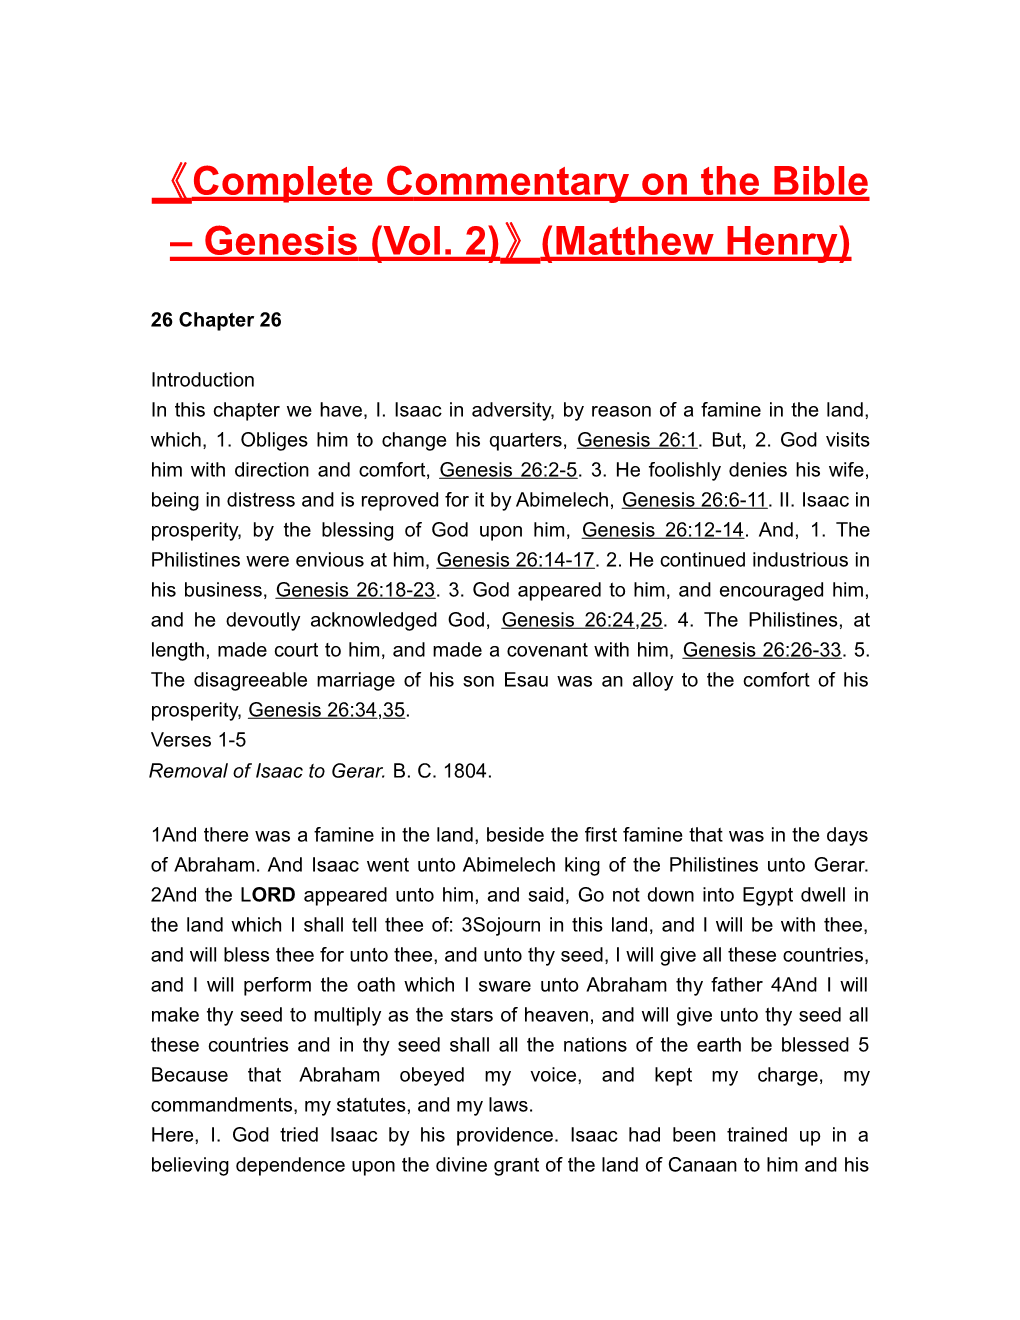 Complete Commentary on the Bible Genesis(Vol. 2) (Matthew Henry)